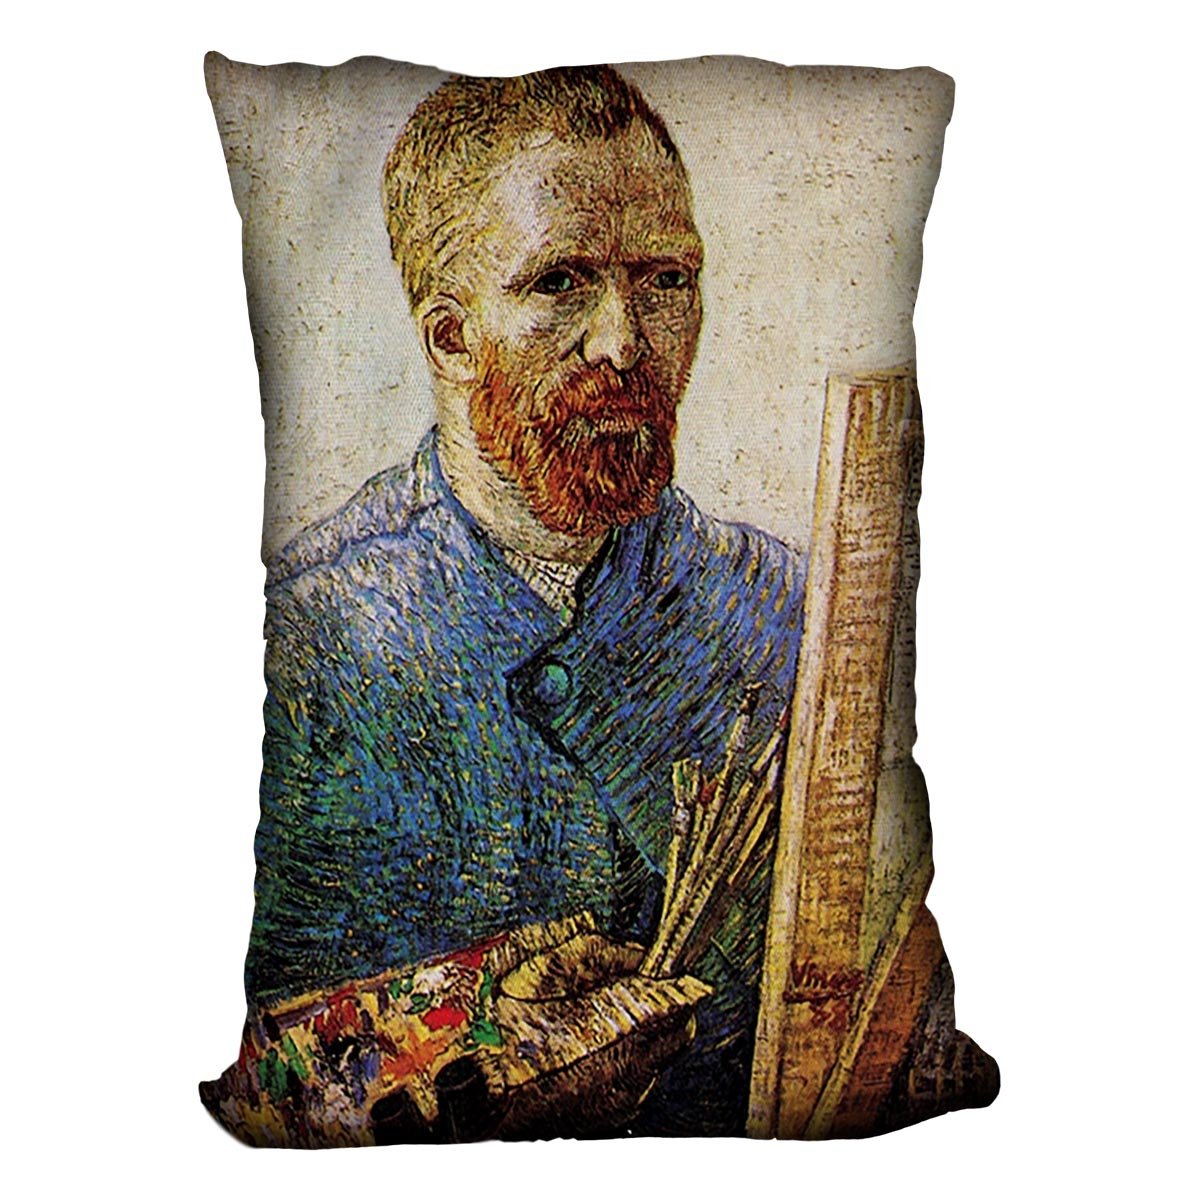 Self-Portrait in Front of the Easel by Van Gogh Throw Pillow